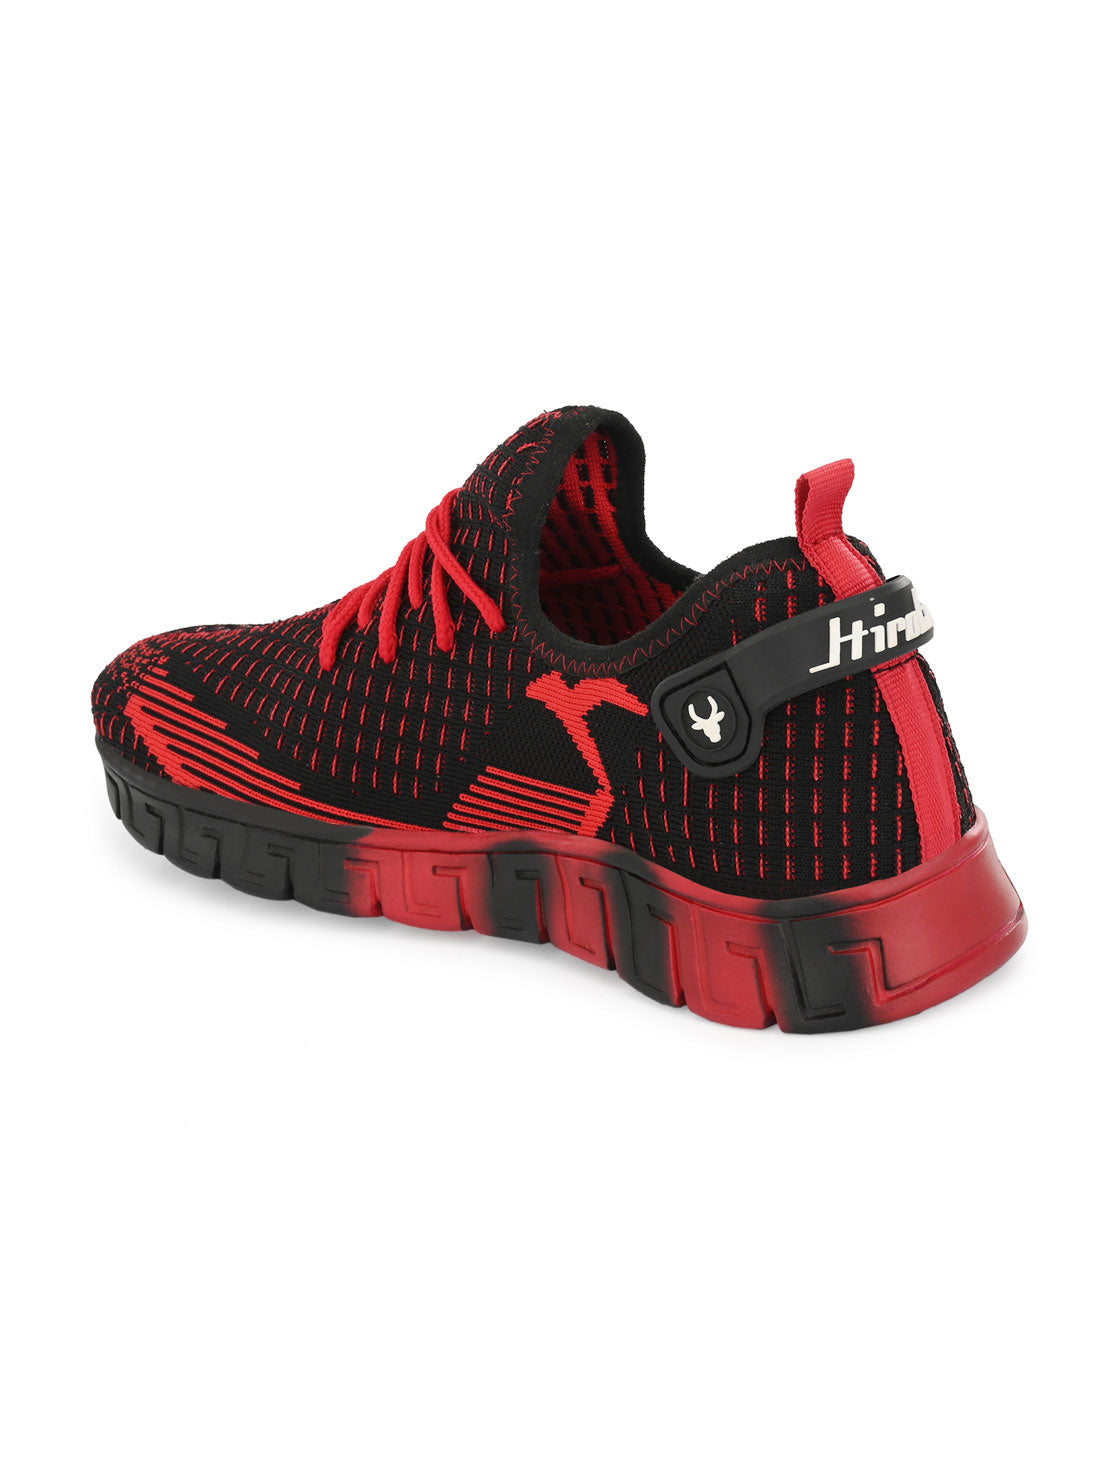 Hirolas® Men's Black/Red Knitted Athleisure Lace Up Sport Shoes (HRL2015BLR)